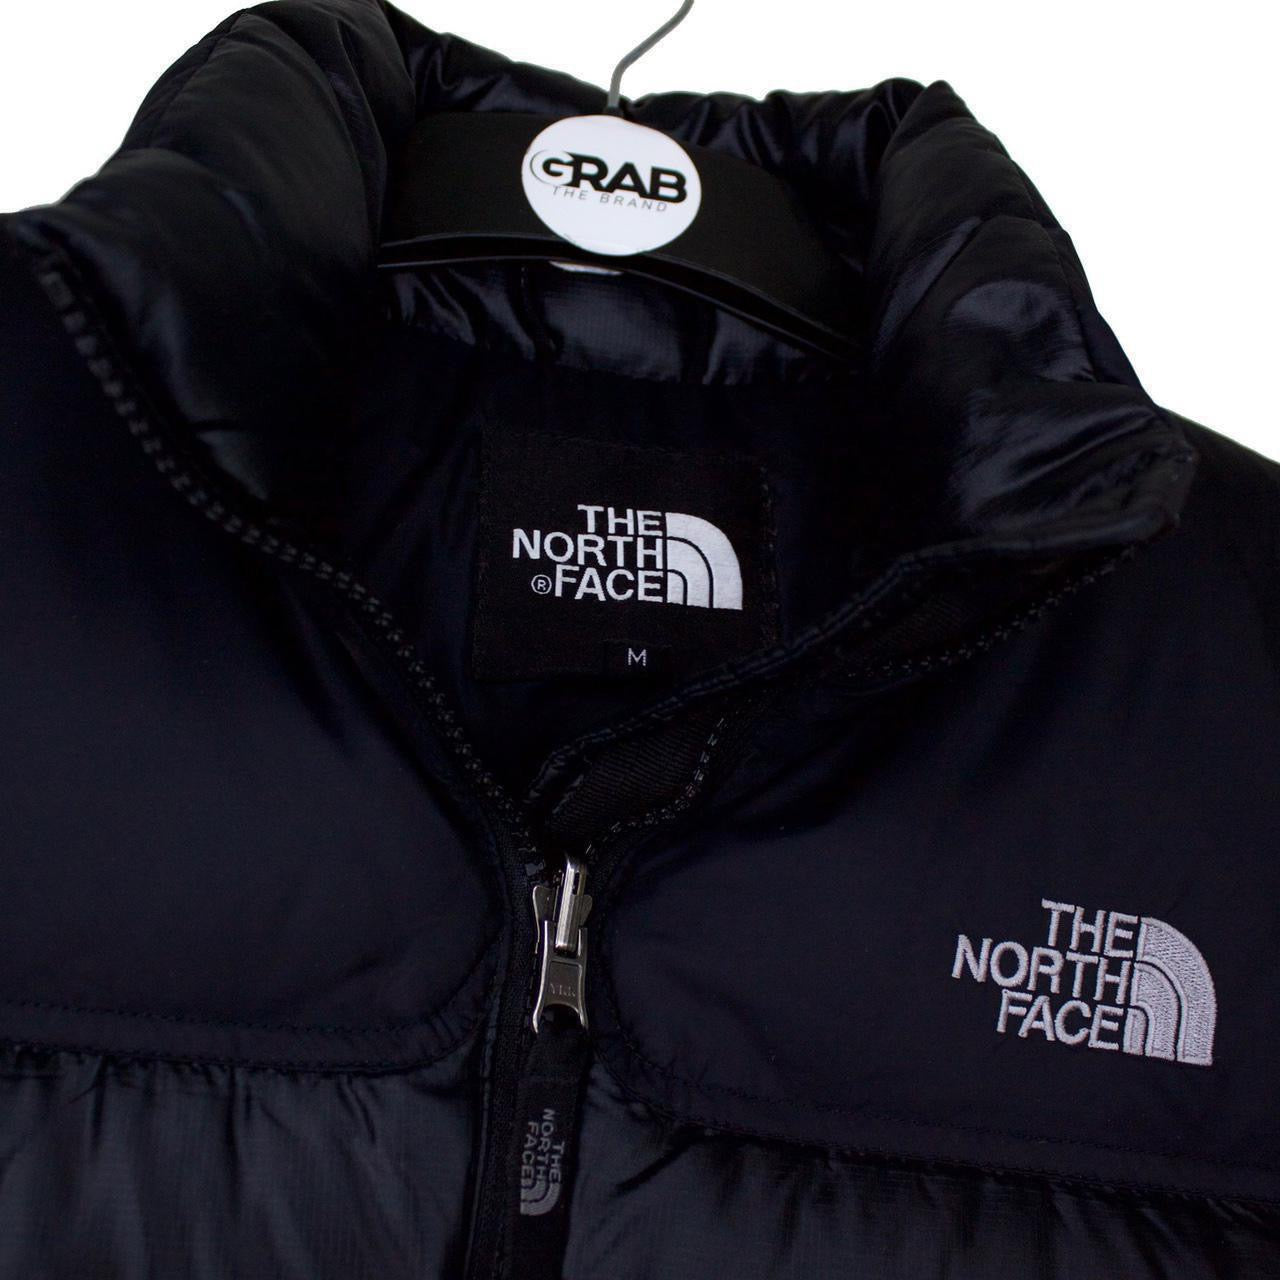 The North Face Men's Quest Jacket | Insulated Jackets | George Fisher